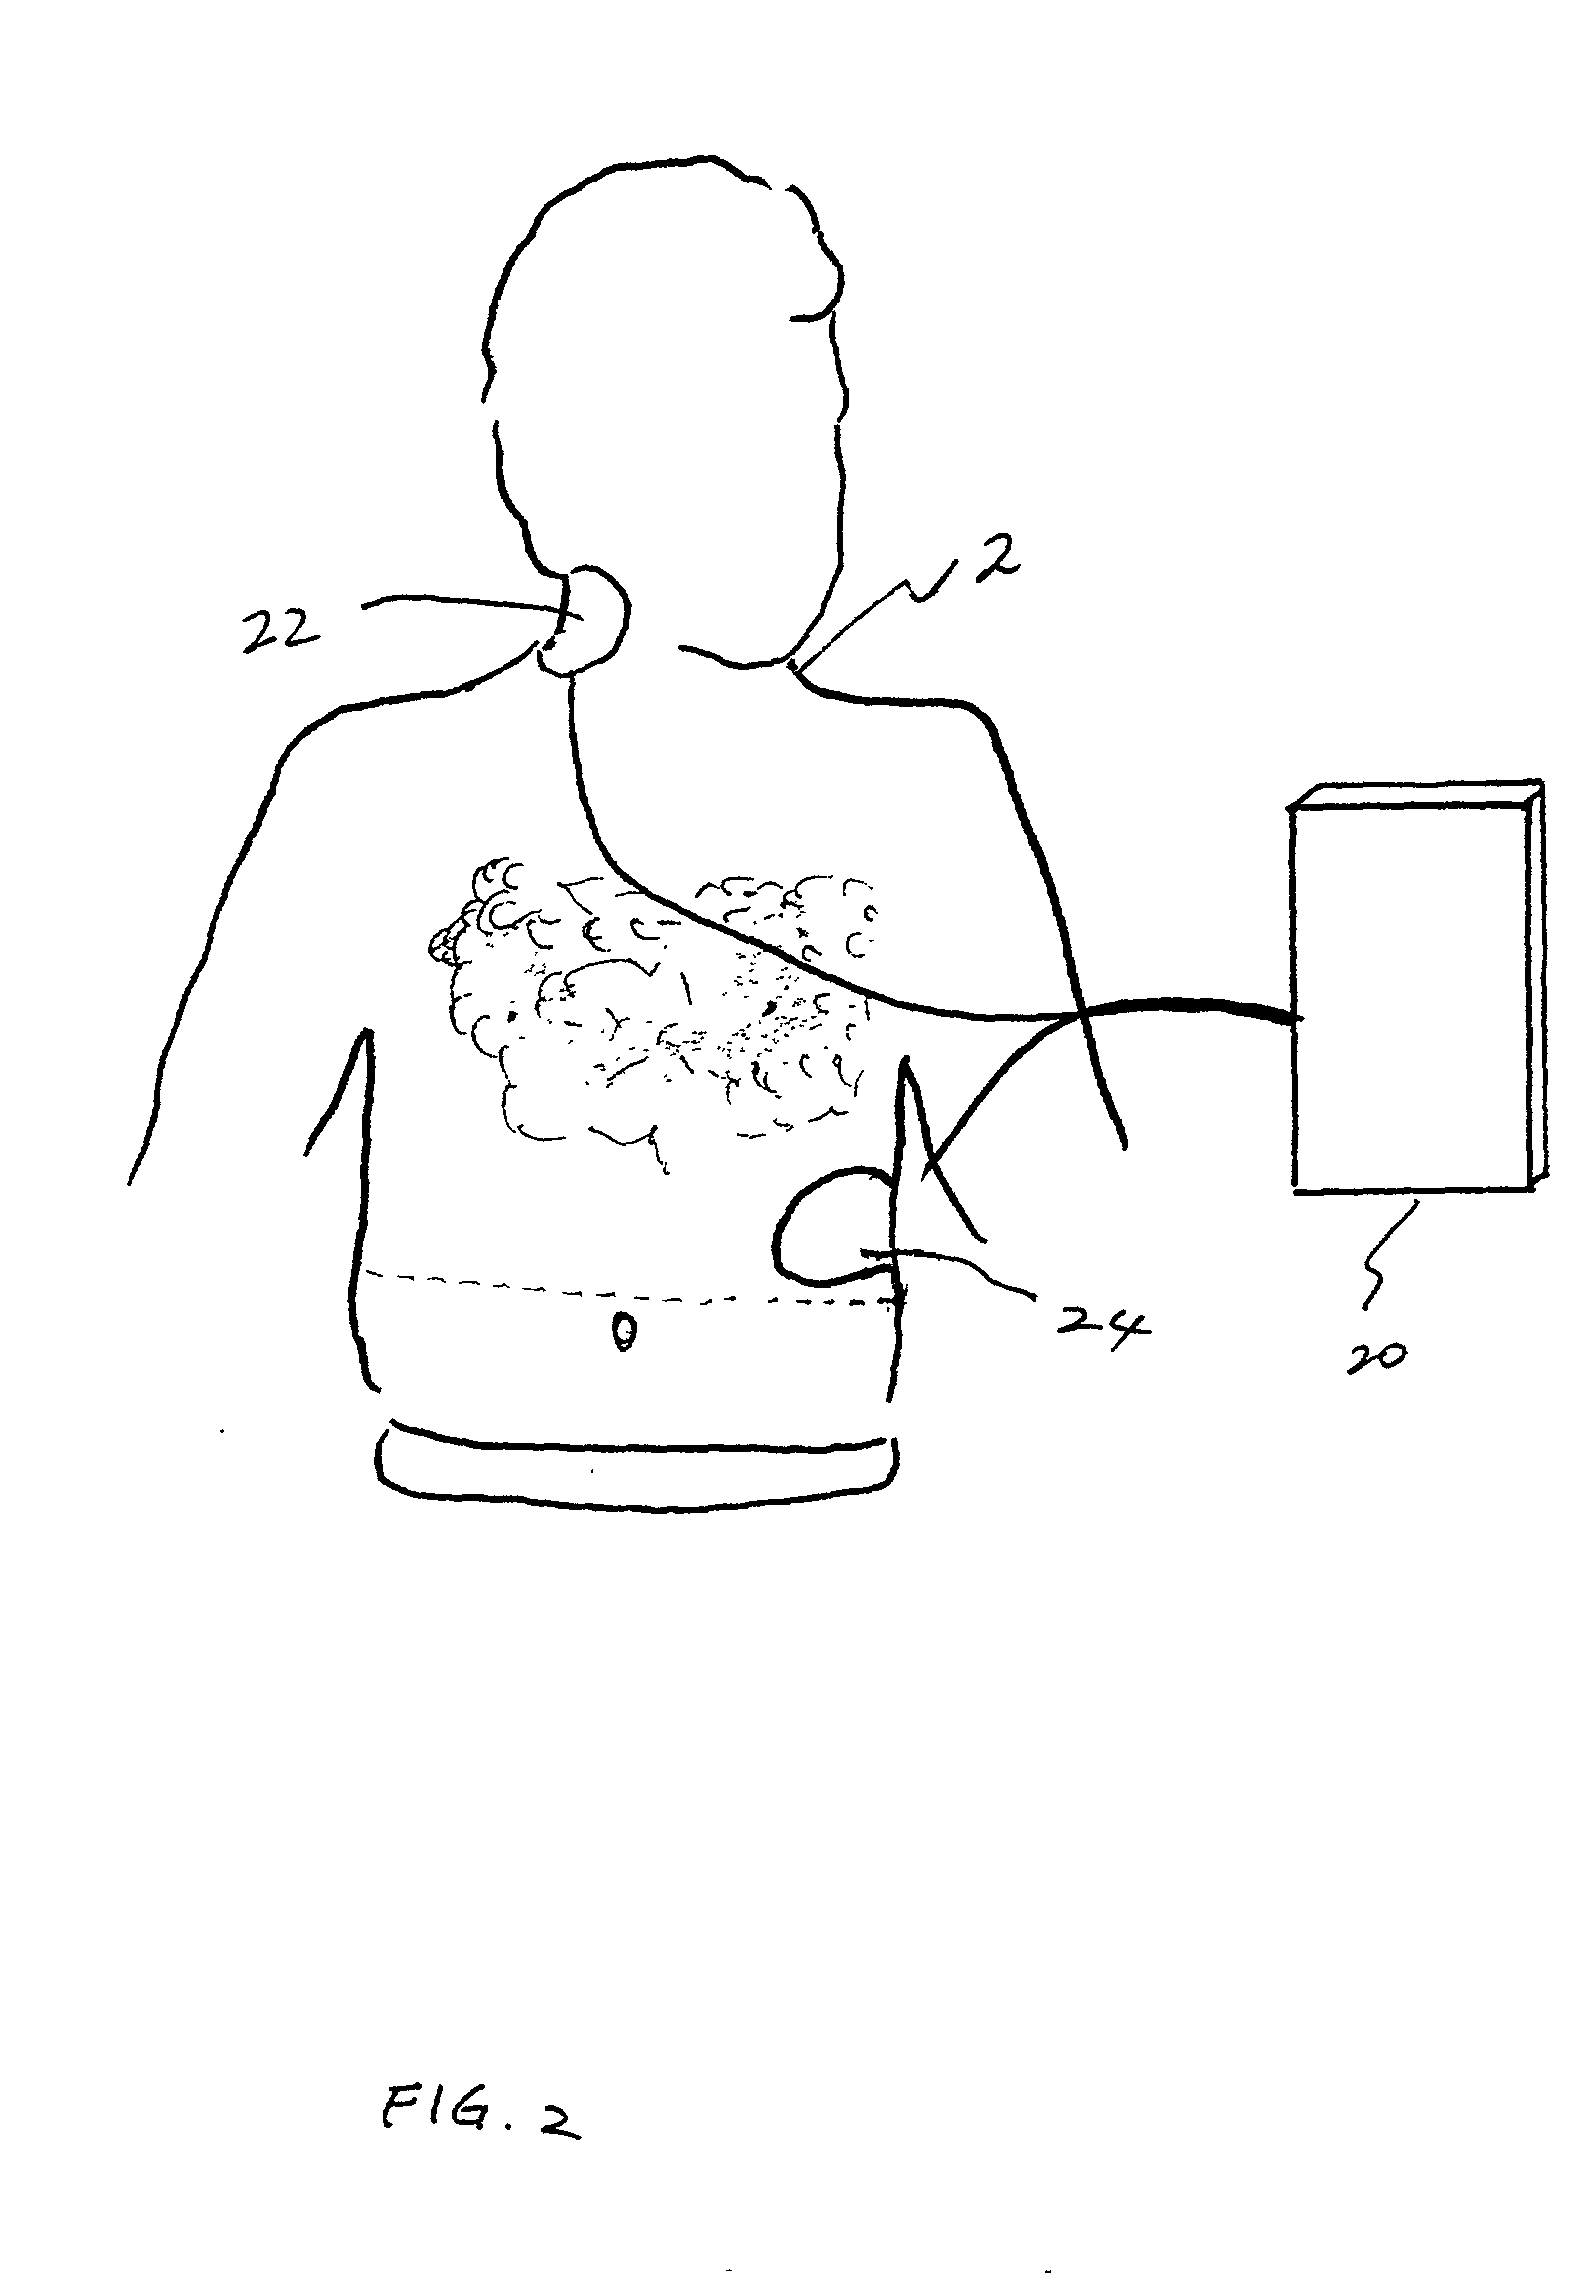 Defibrillation system and method designed for rapid attachment